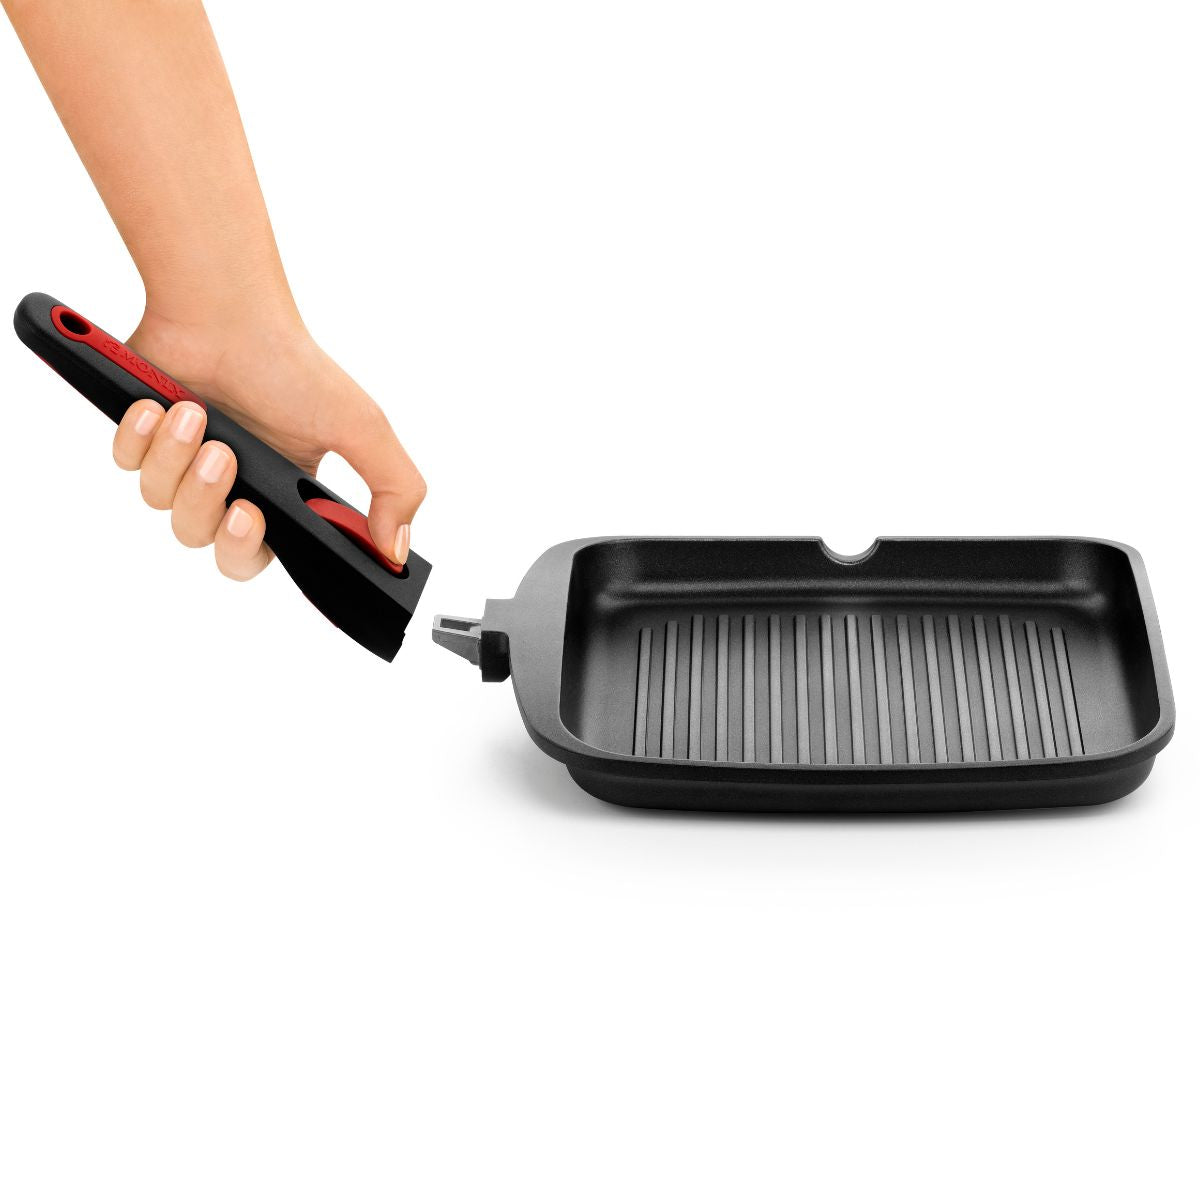 In&Out Ribbed Grill Pan